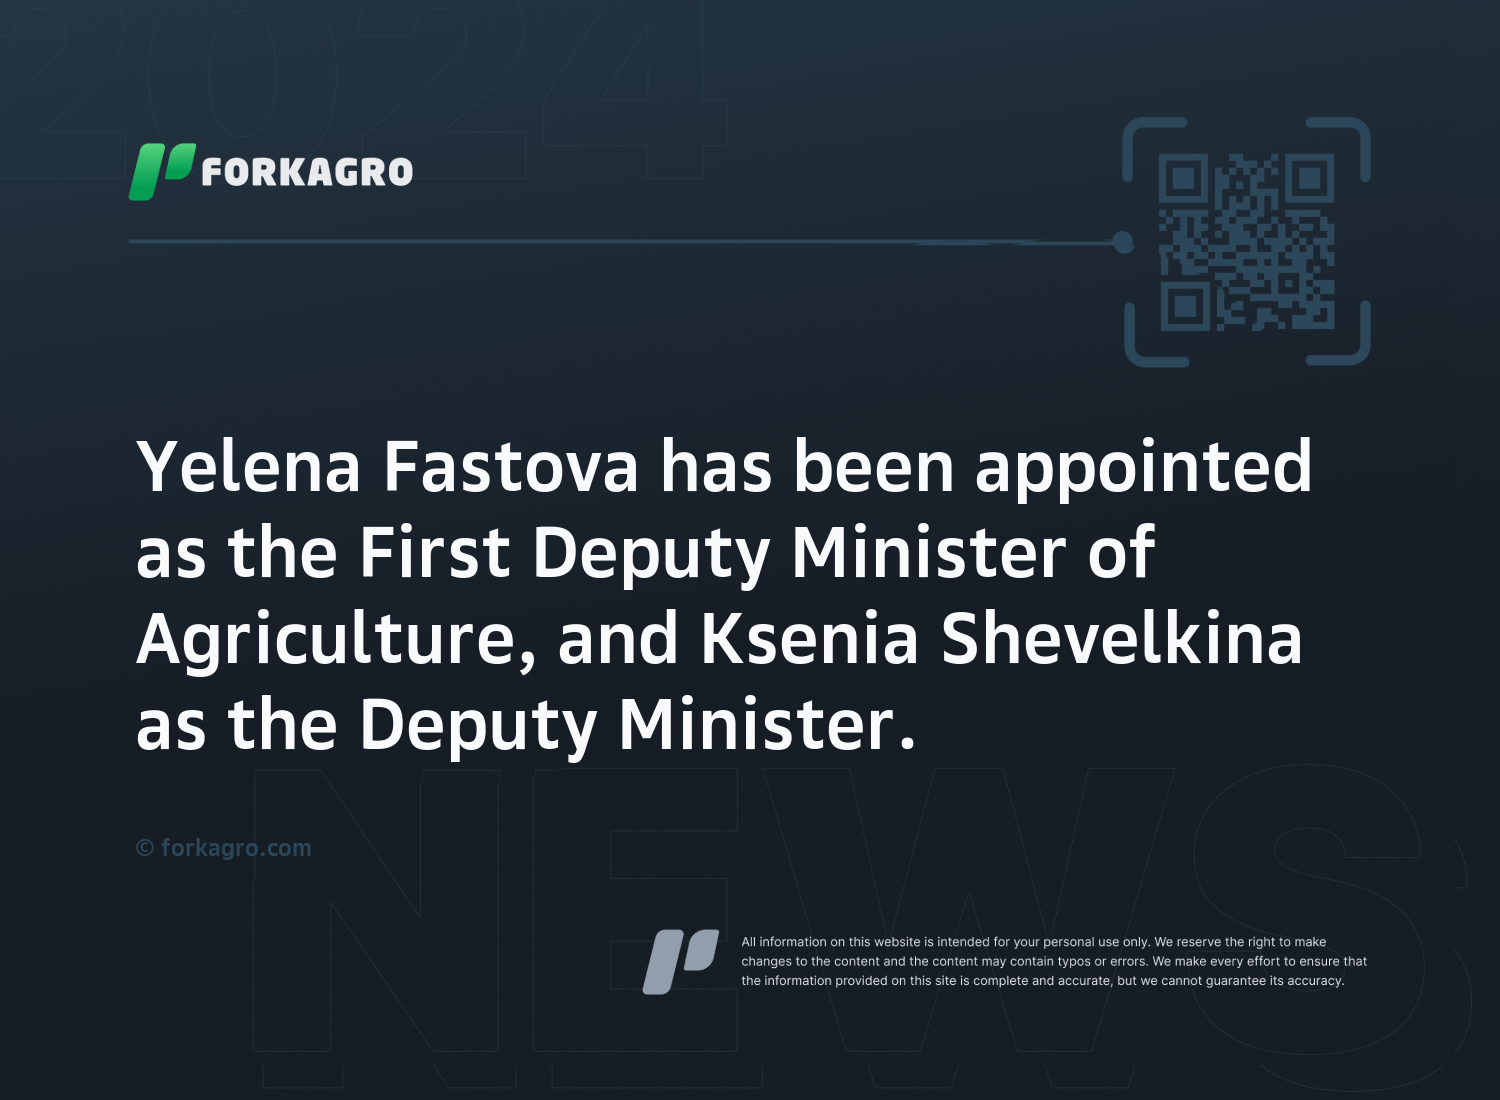 Yelena Fastova has been appointed as the First Deputy Minister of Agriculture, and Ksenia Shevelkina as the Deputy Minister.